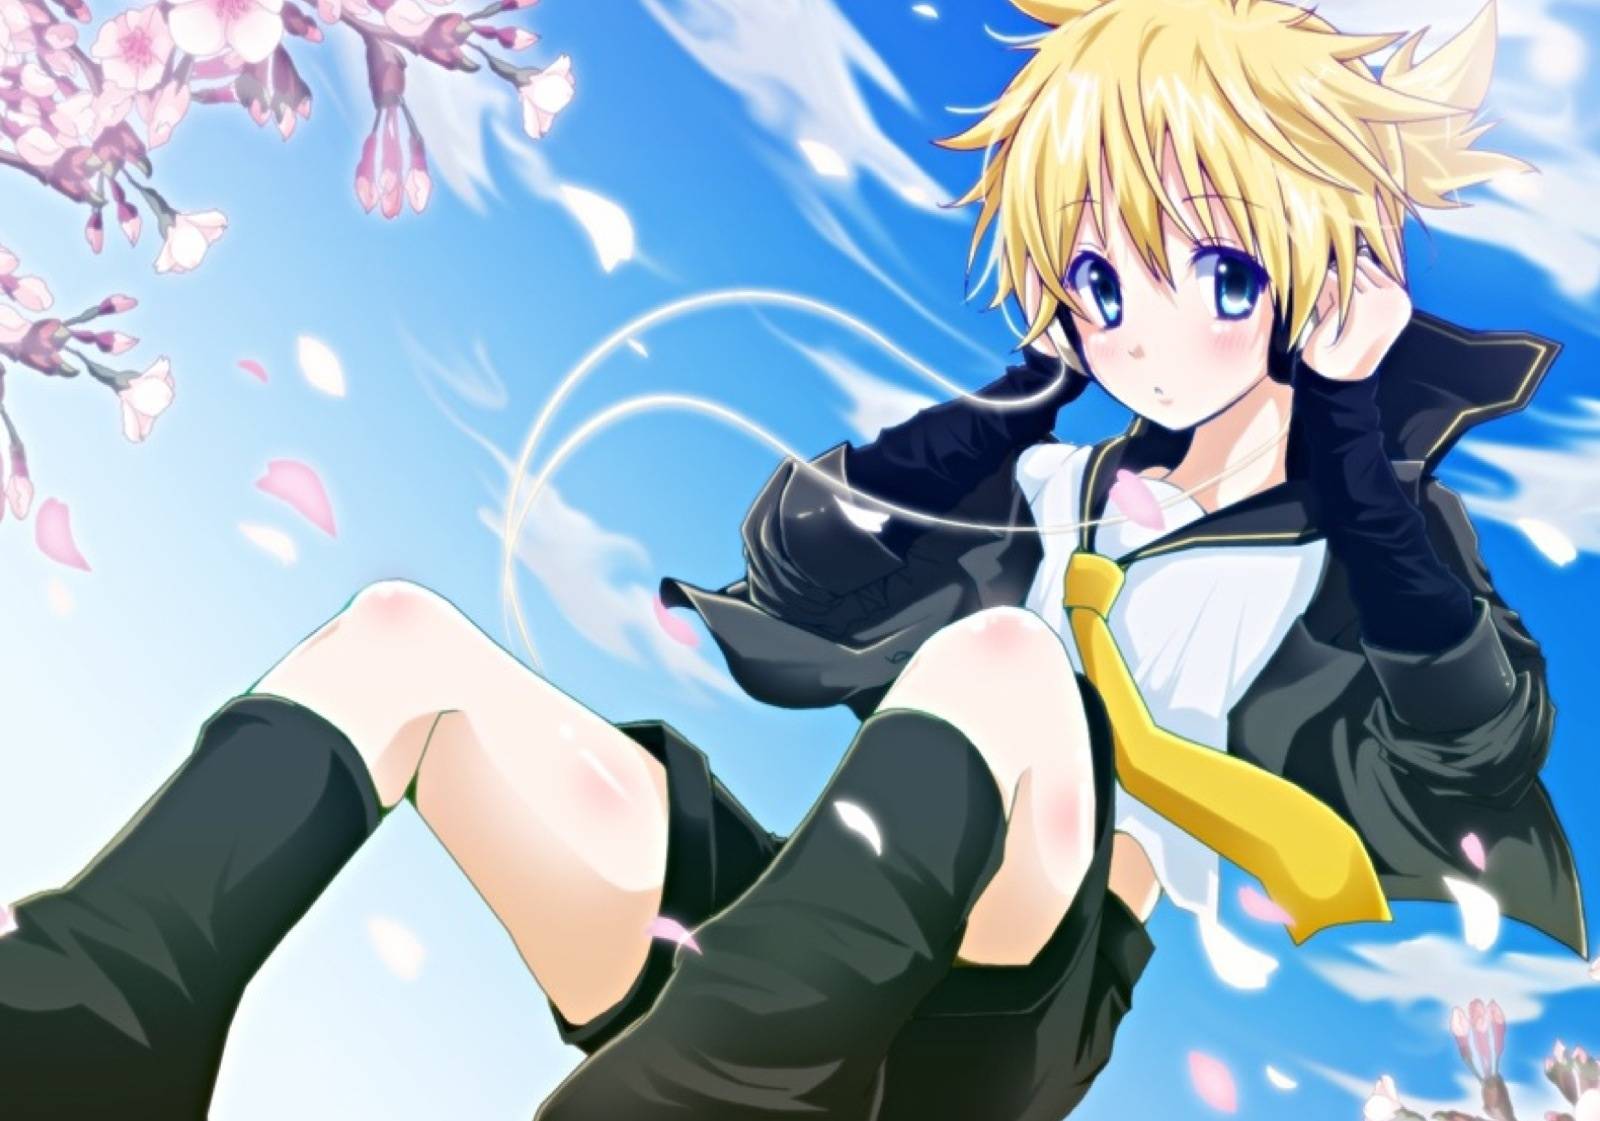 A beautiful anime wallpaper of Len Kagamine from Vocaloid. - 